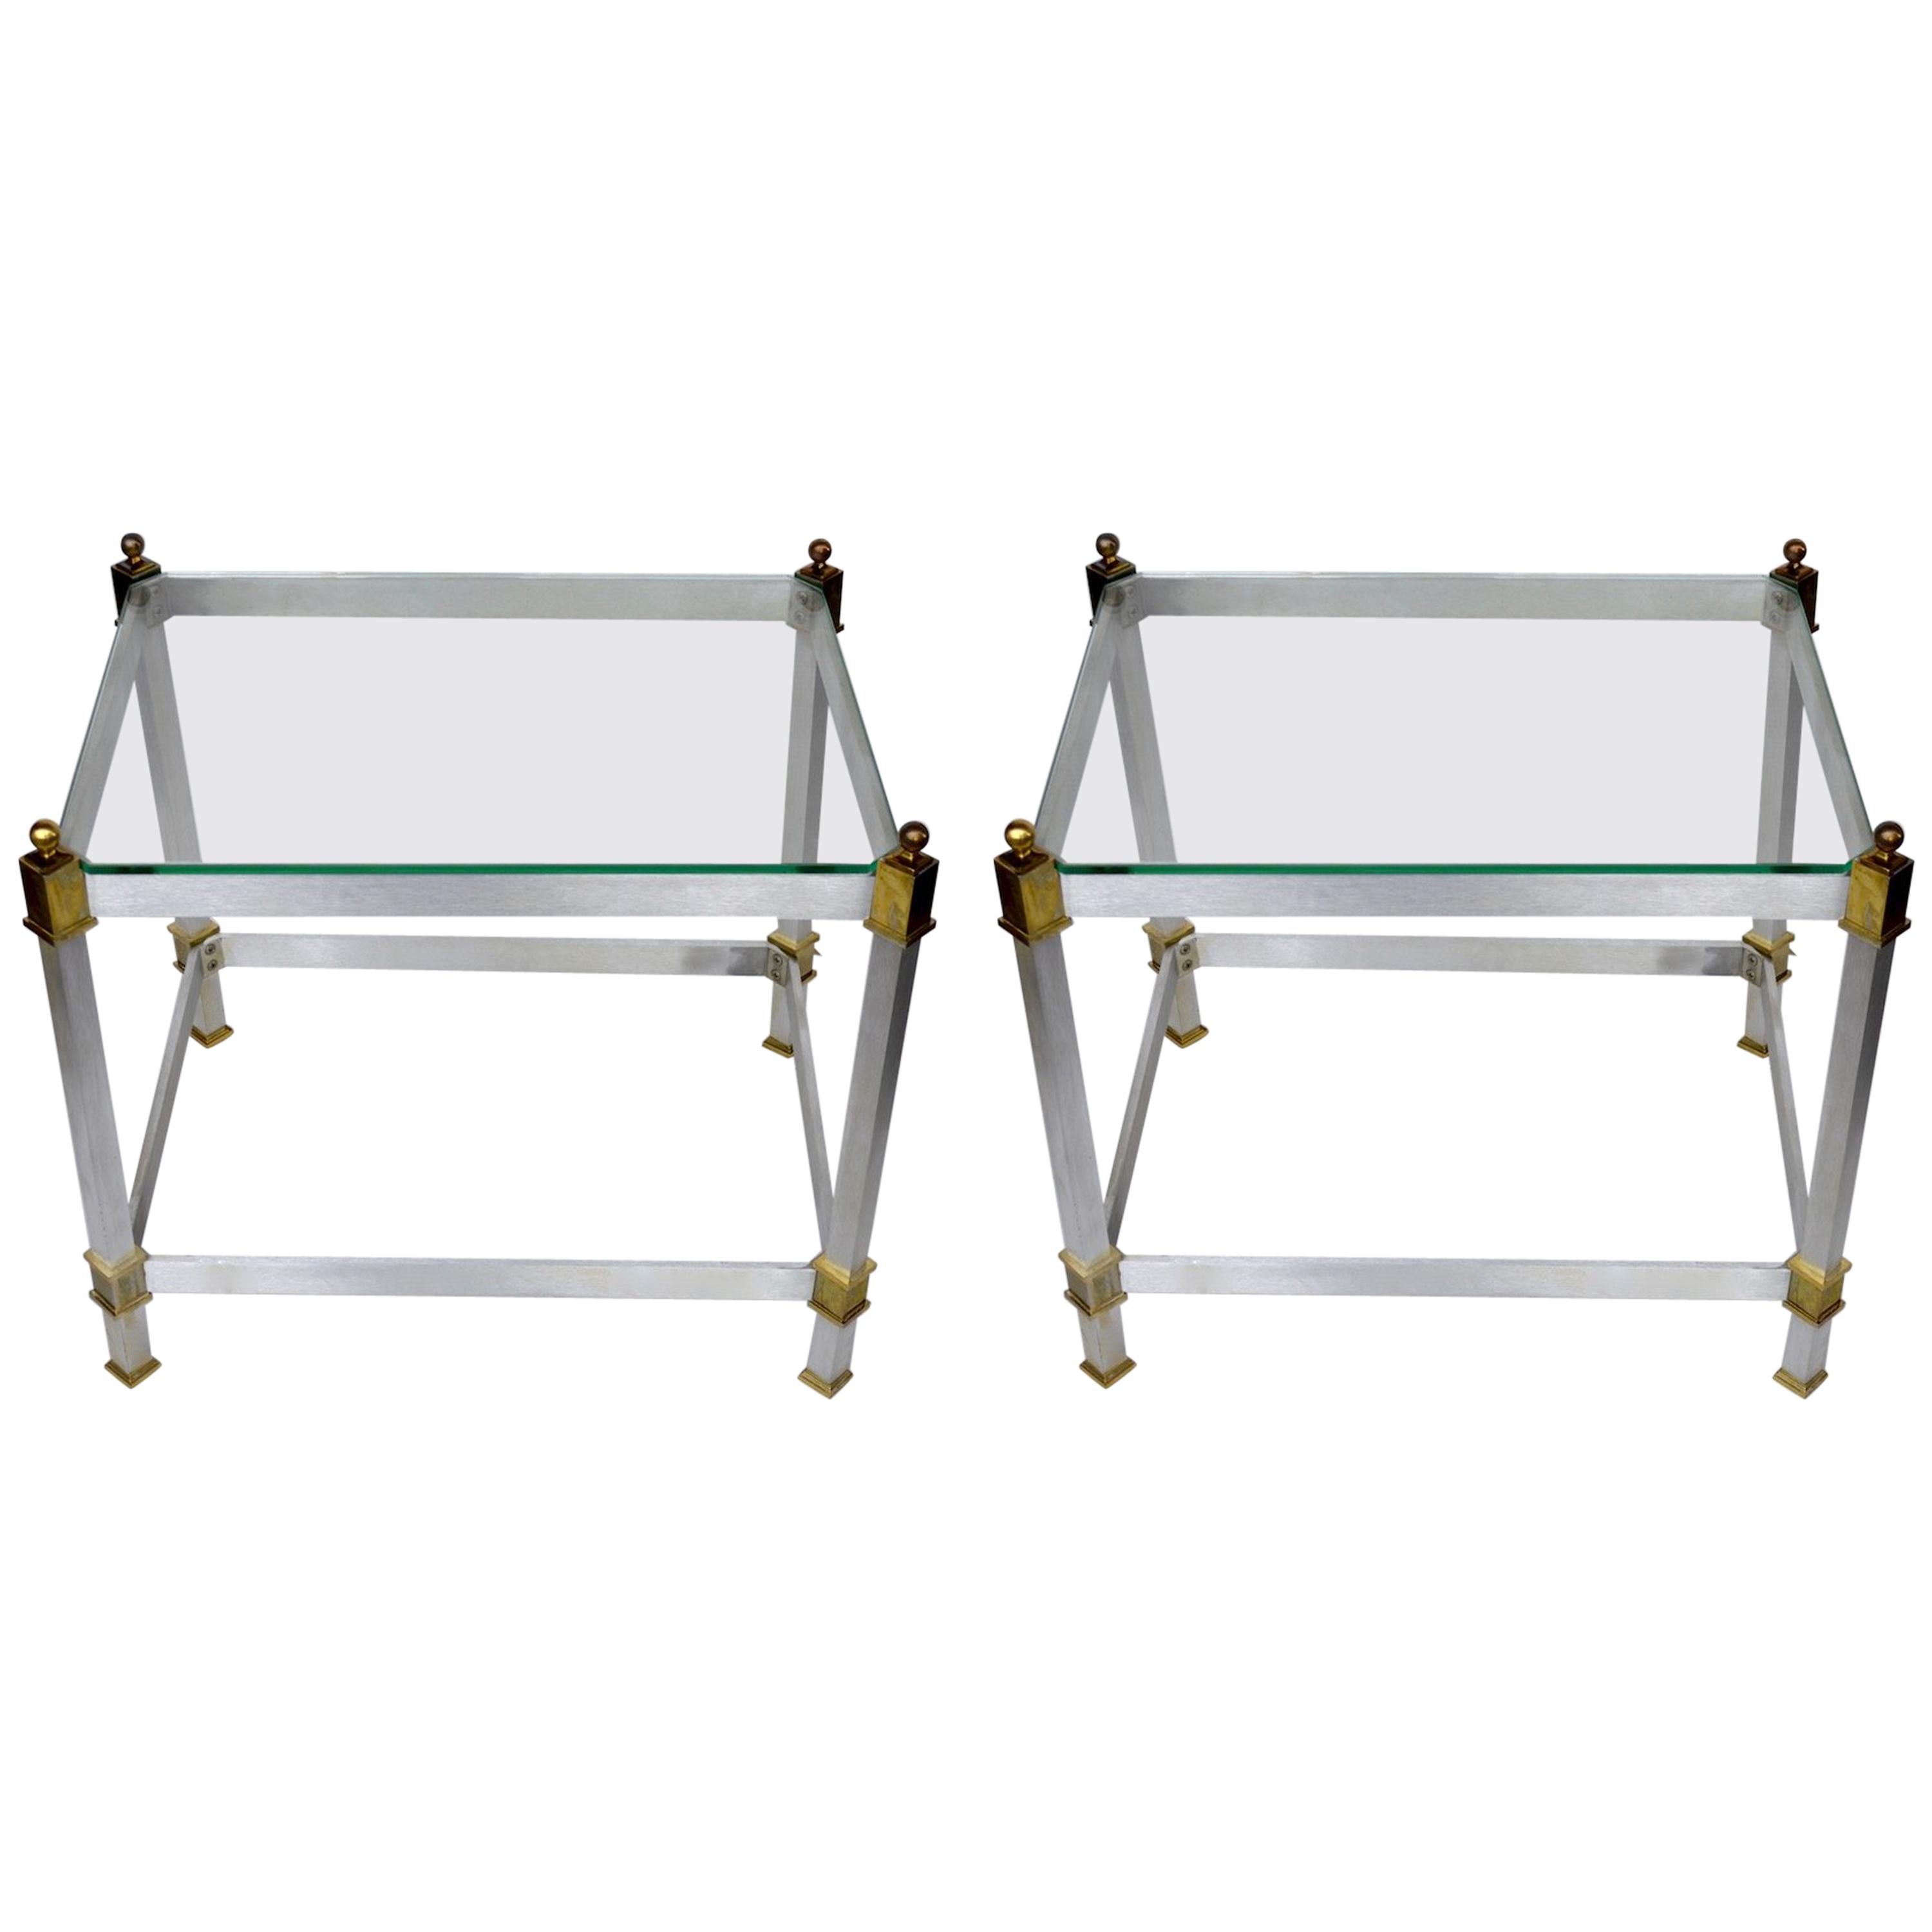 Pair of Classical Aluminum Brass and Glass Tables Attributed to Maison Jansen